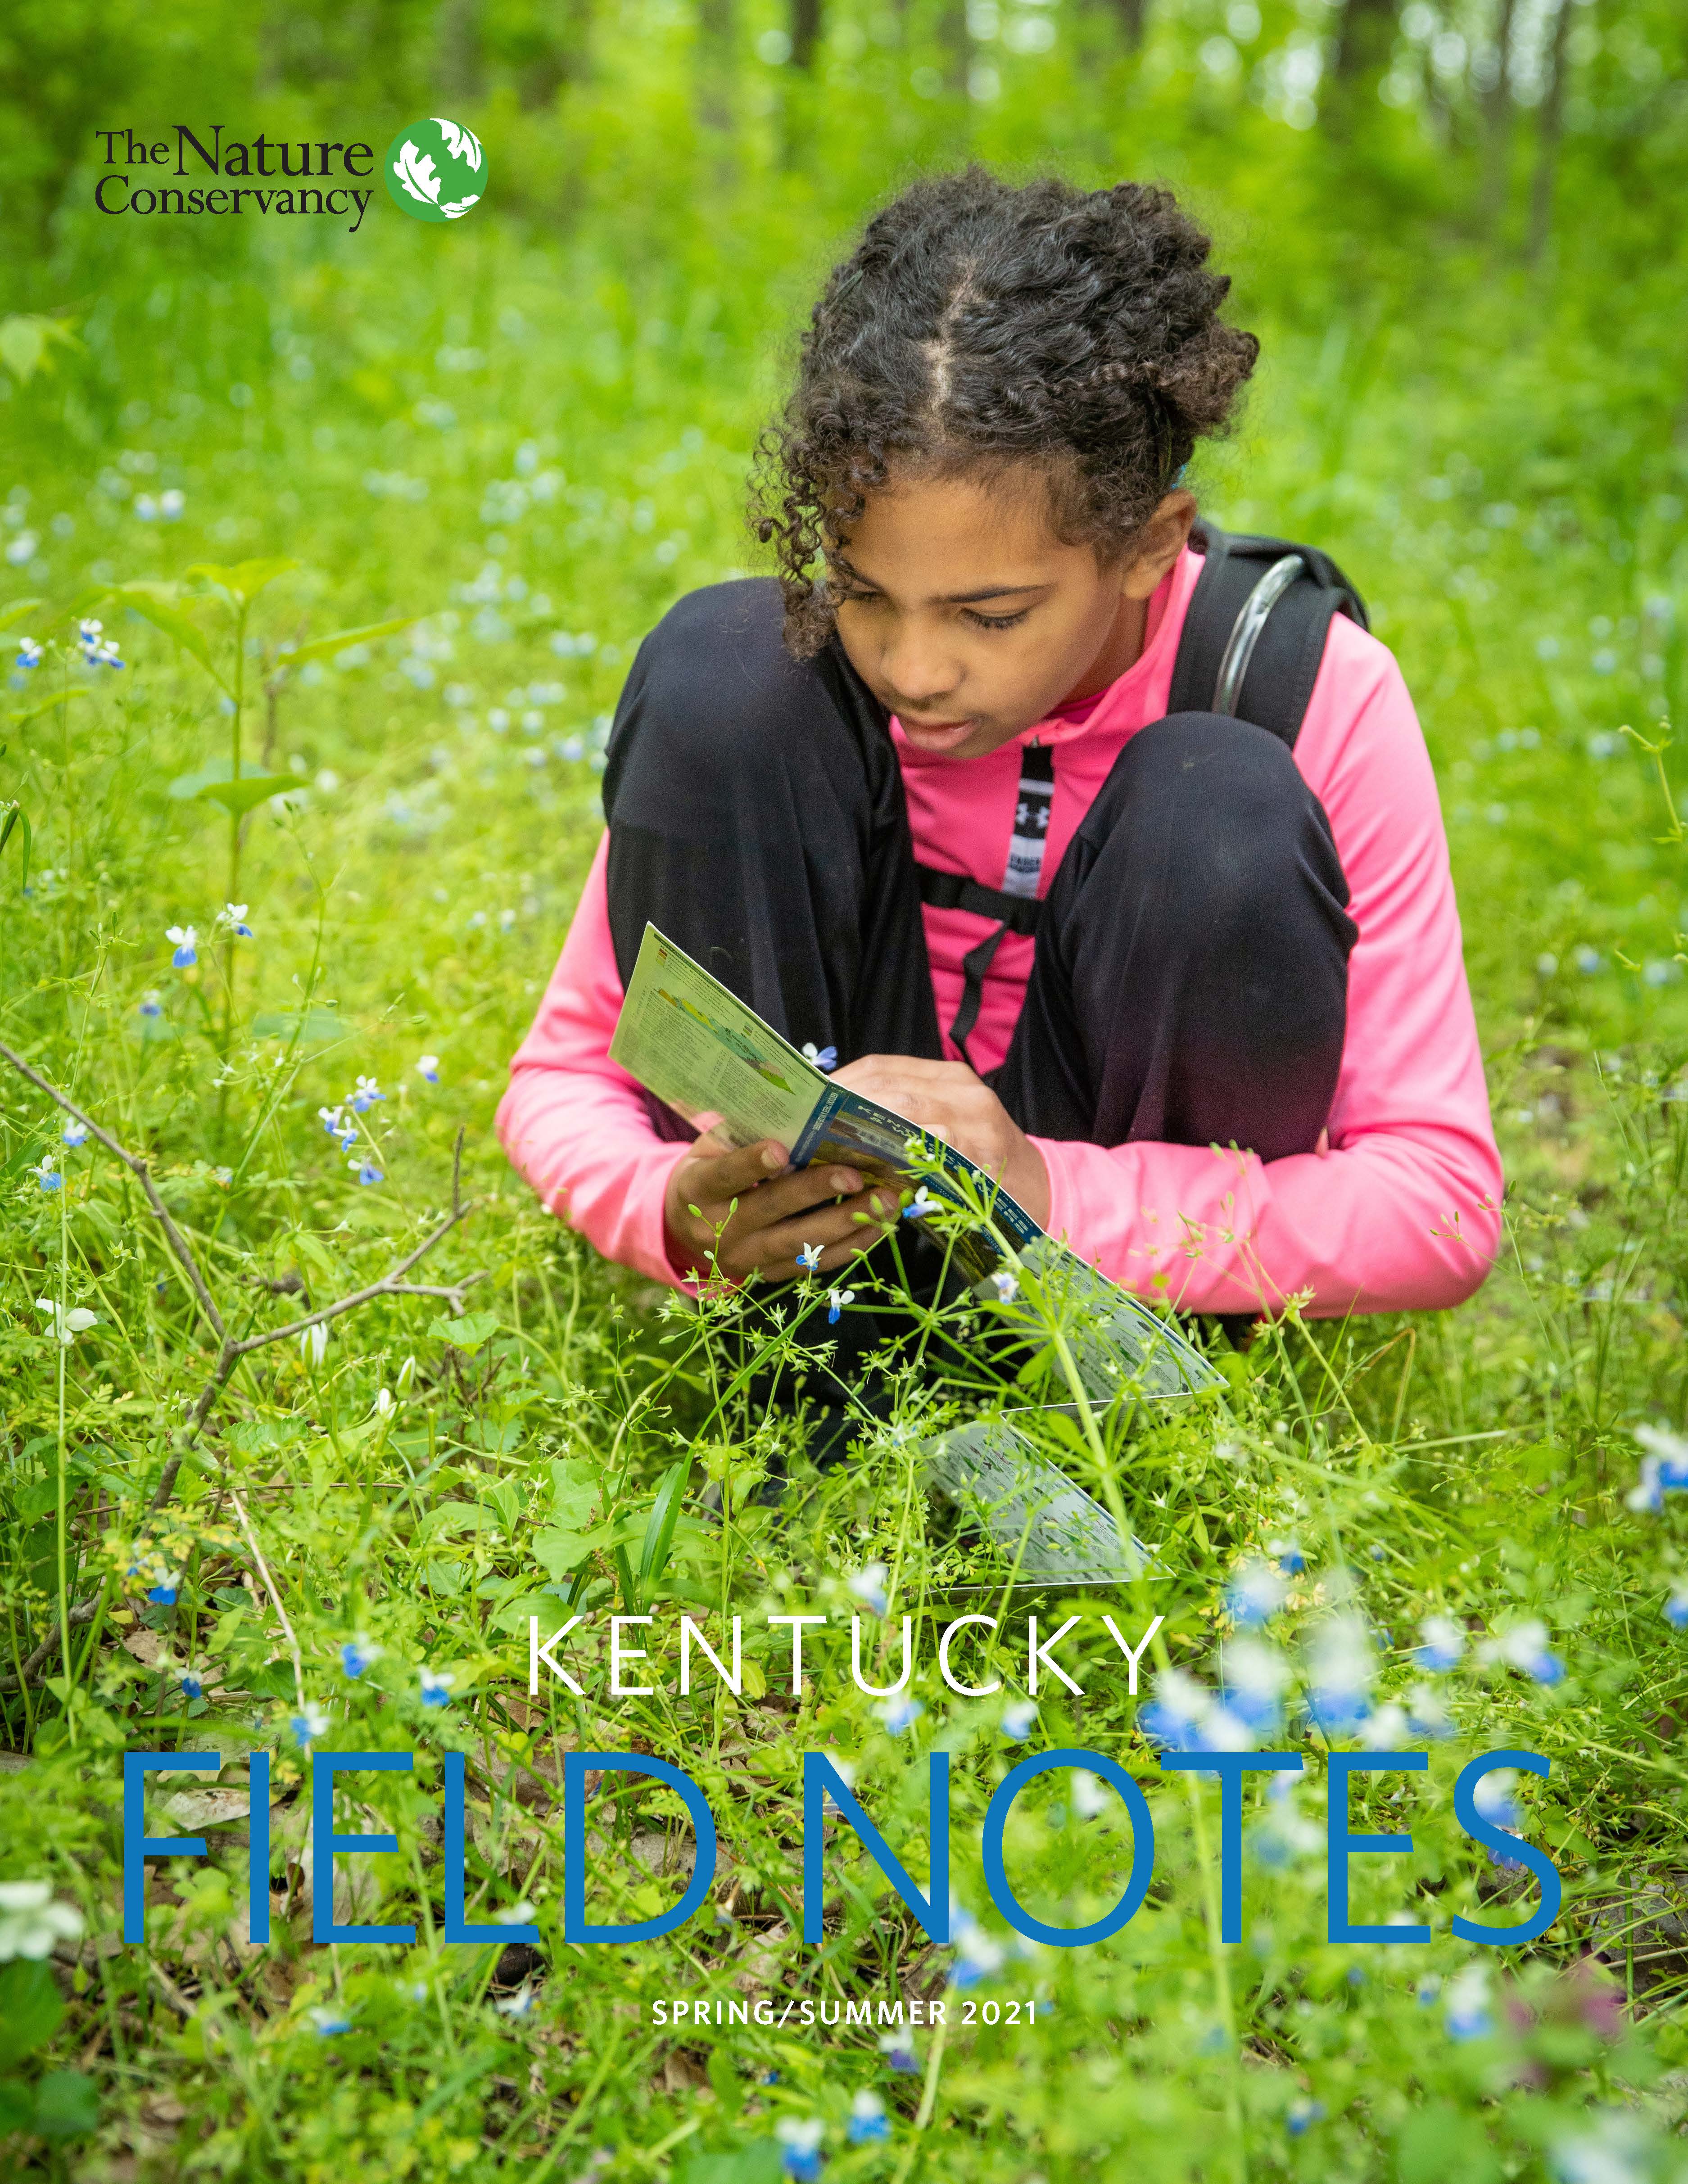 A youth sits in a field and studies flowers.